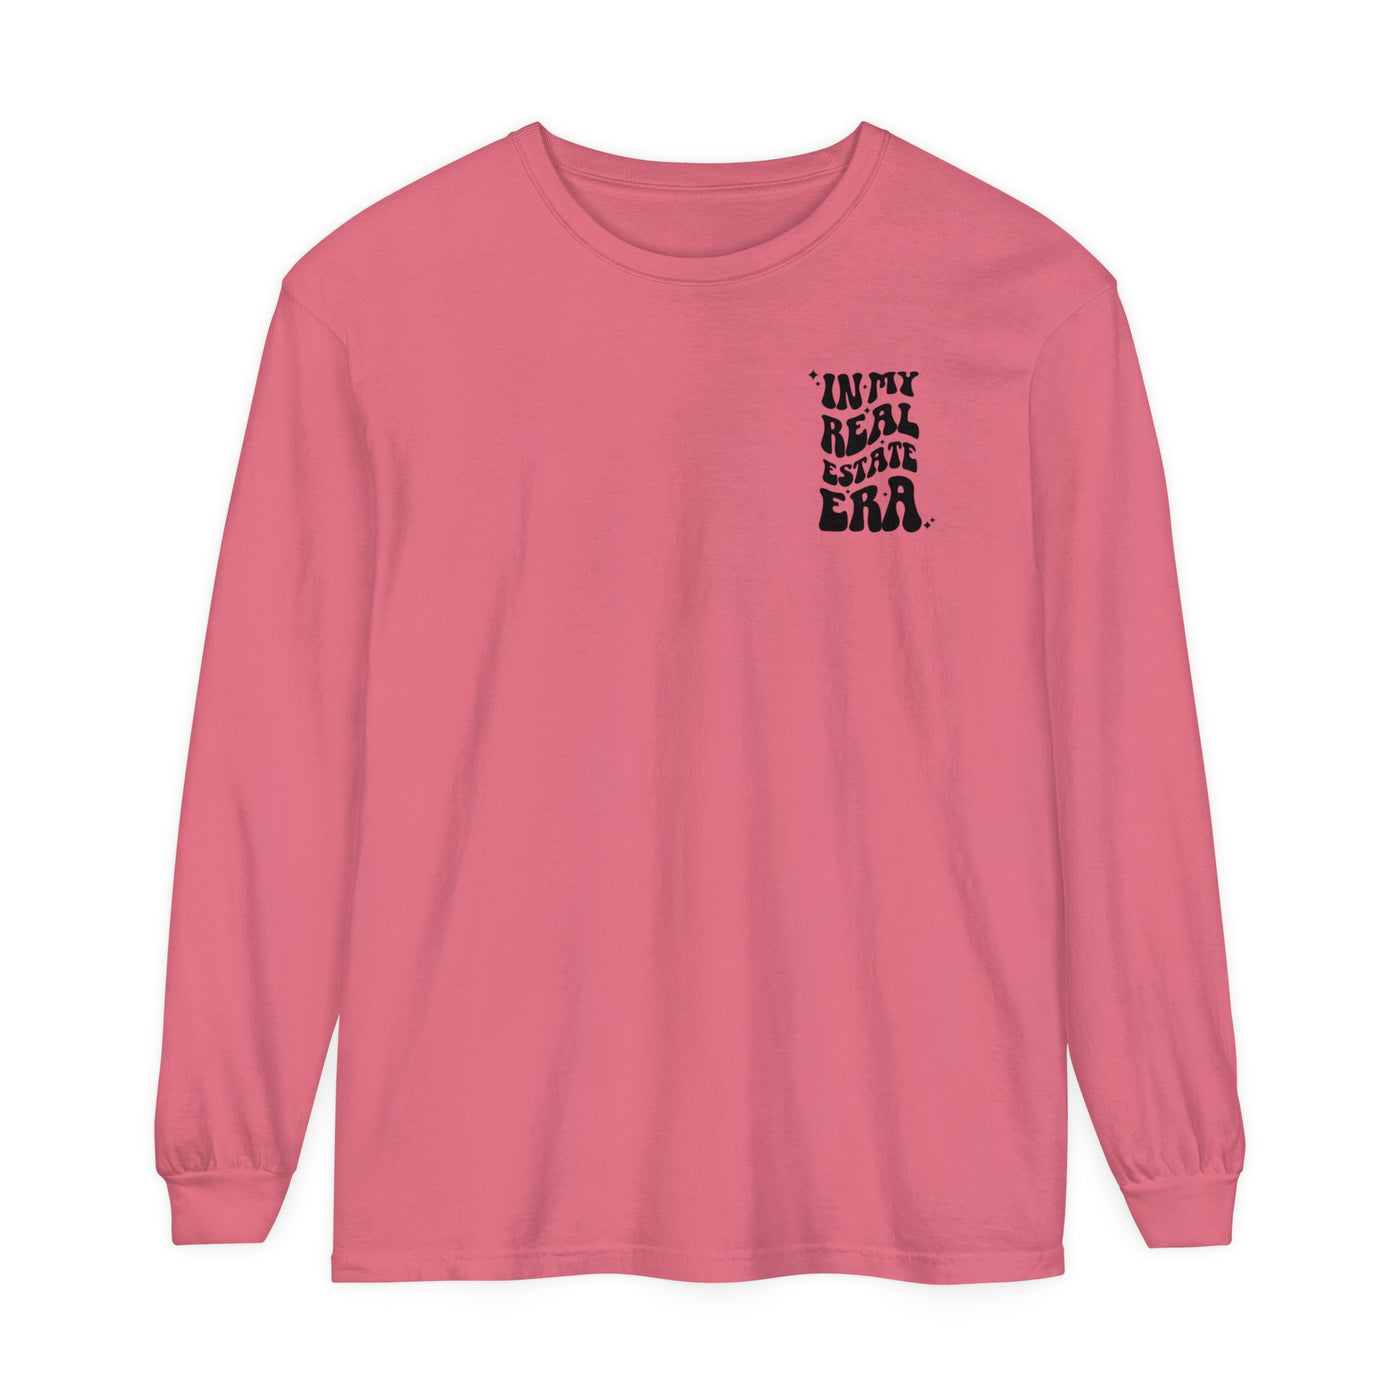 Long Sleeve Unisex Comfort Colors T-Shirt - In My Real Estate Era